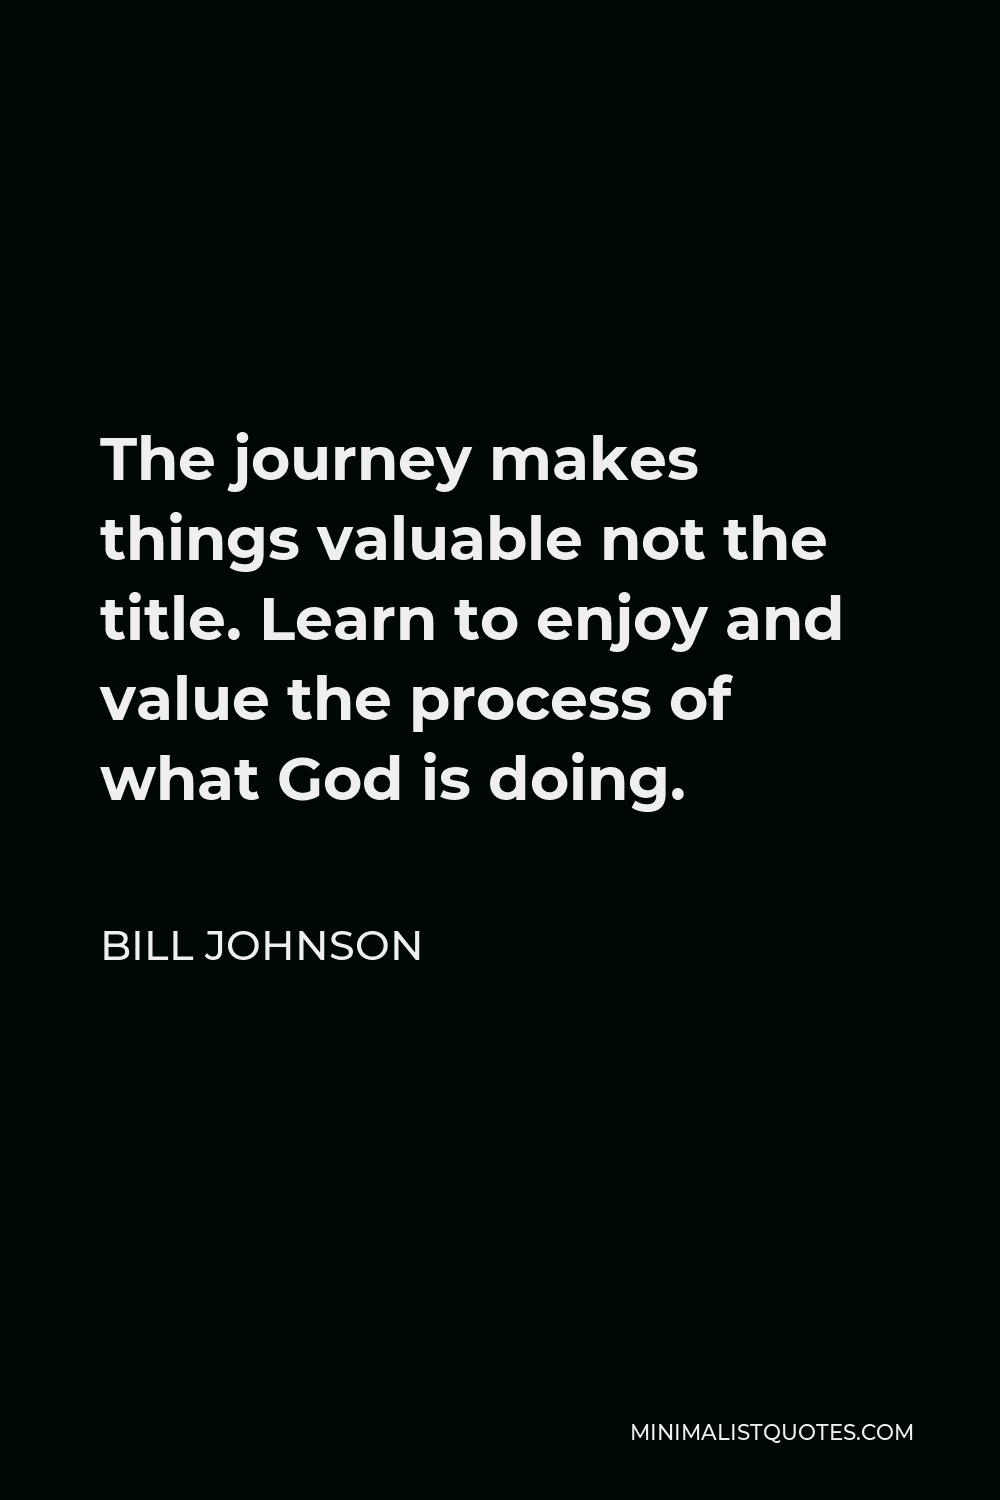 Bill Johnson Quote - The journey makes things valuable not the title. Learn to enjoy and value the process of what God is doing.